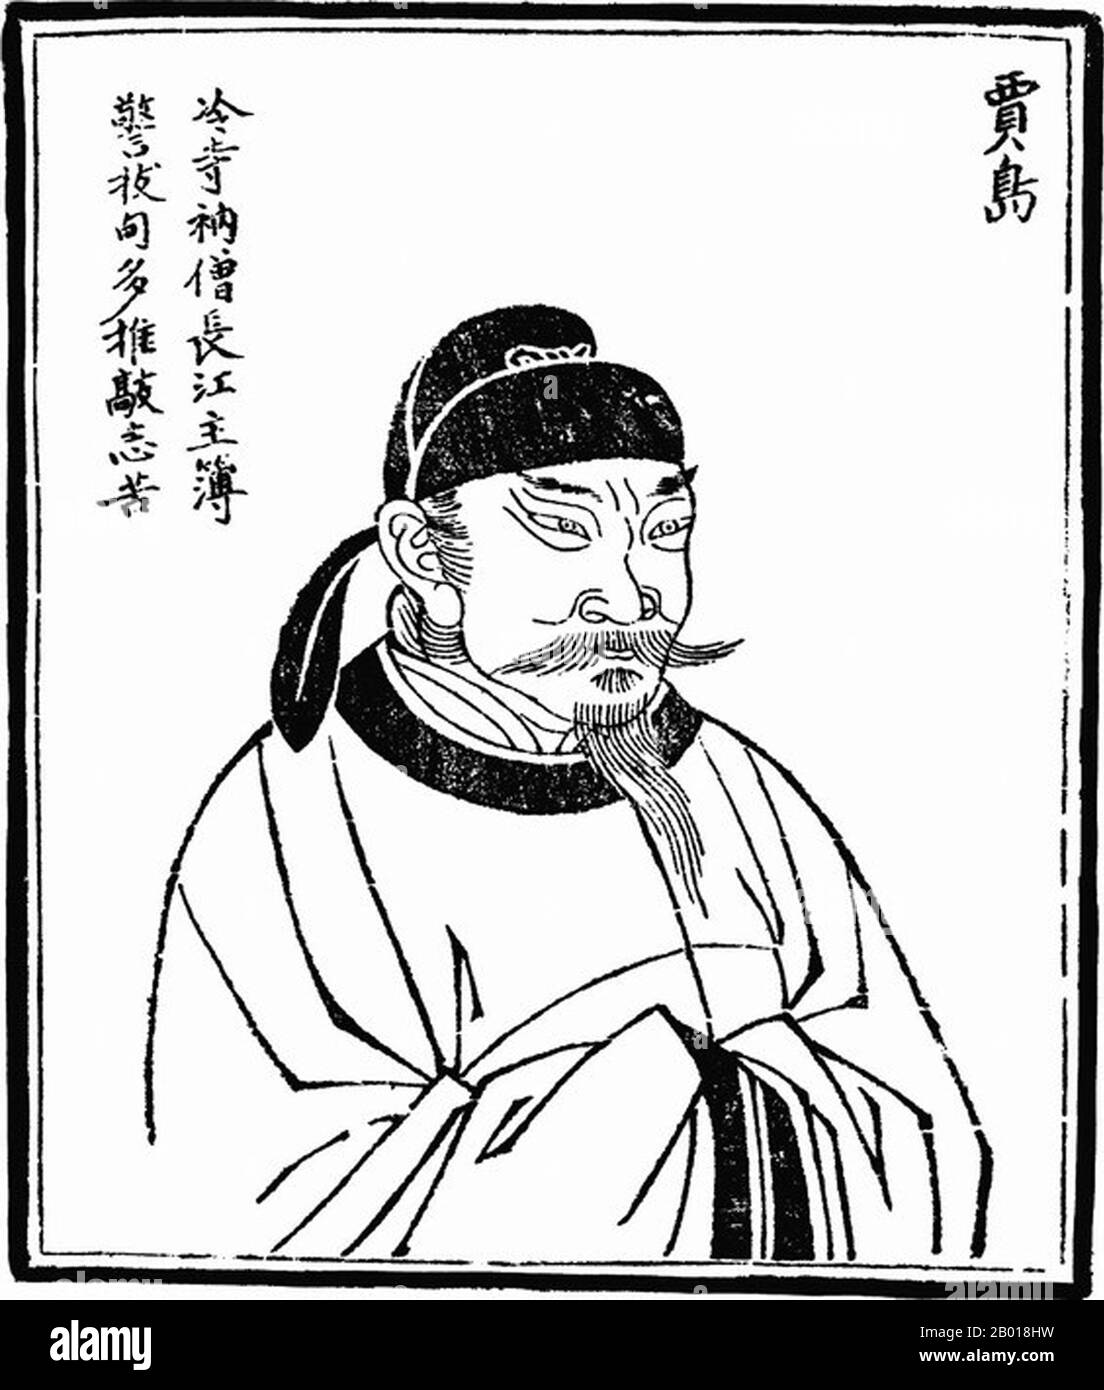 China: Jia Dao (779-843), Tang Dynasty poet and calligrapher. Woodblock print from 'Images of Ancient People in History', c. 1498.  Jia Dao, also spelt Chia Tao and courtesy name Langxian, was a Chinese poet active during the Tang Dynasty. He was born near modern Beijing; after a period as a Buddhist monk, he went to Chang'an. He became one of Han Yu's disciples, but failed the jinshi exam several times. He wrote both discursive gushi and lyric jintishi. His works were dismissed as 'thin' by Su Shi, and some other commentators have considered them limited and artificial. Stock Photo